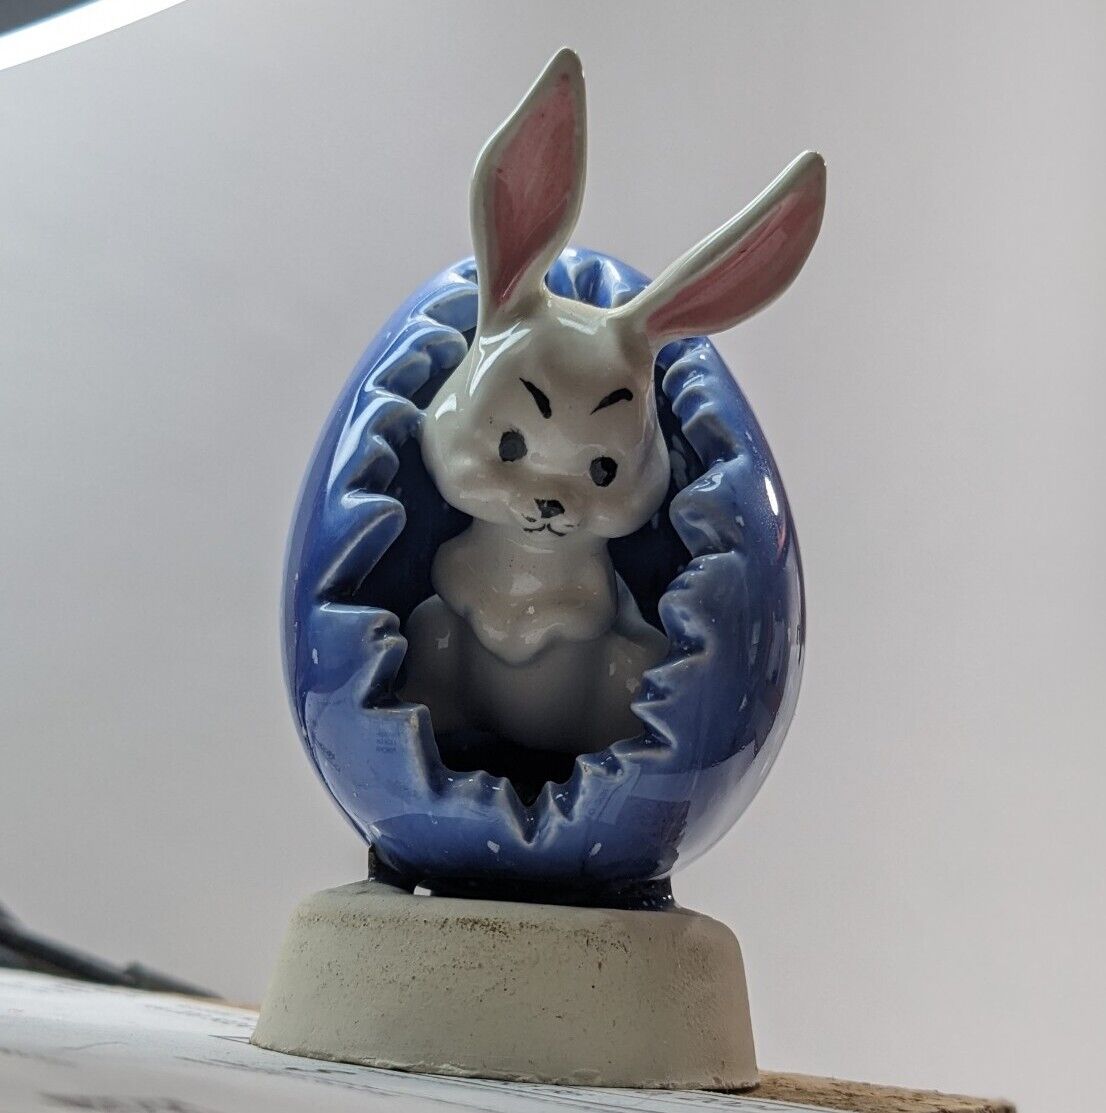 Bunny Rabbit coming out of Cracked Easter Egg Figurine 3 in tall